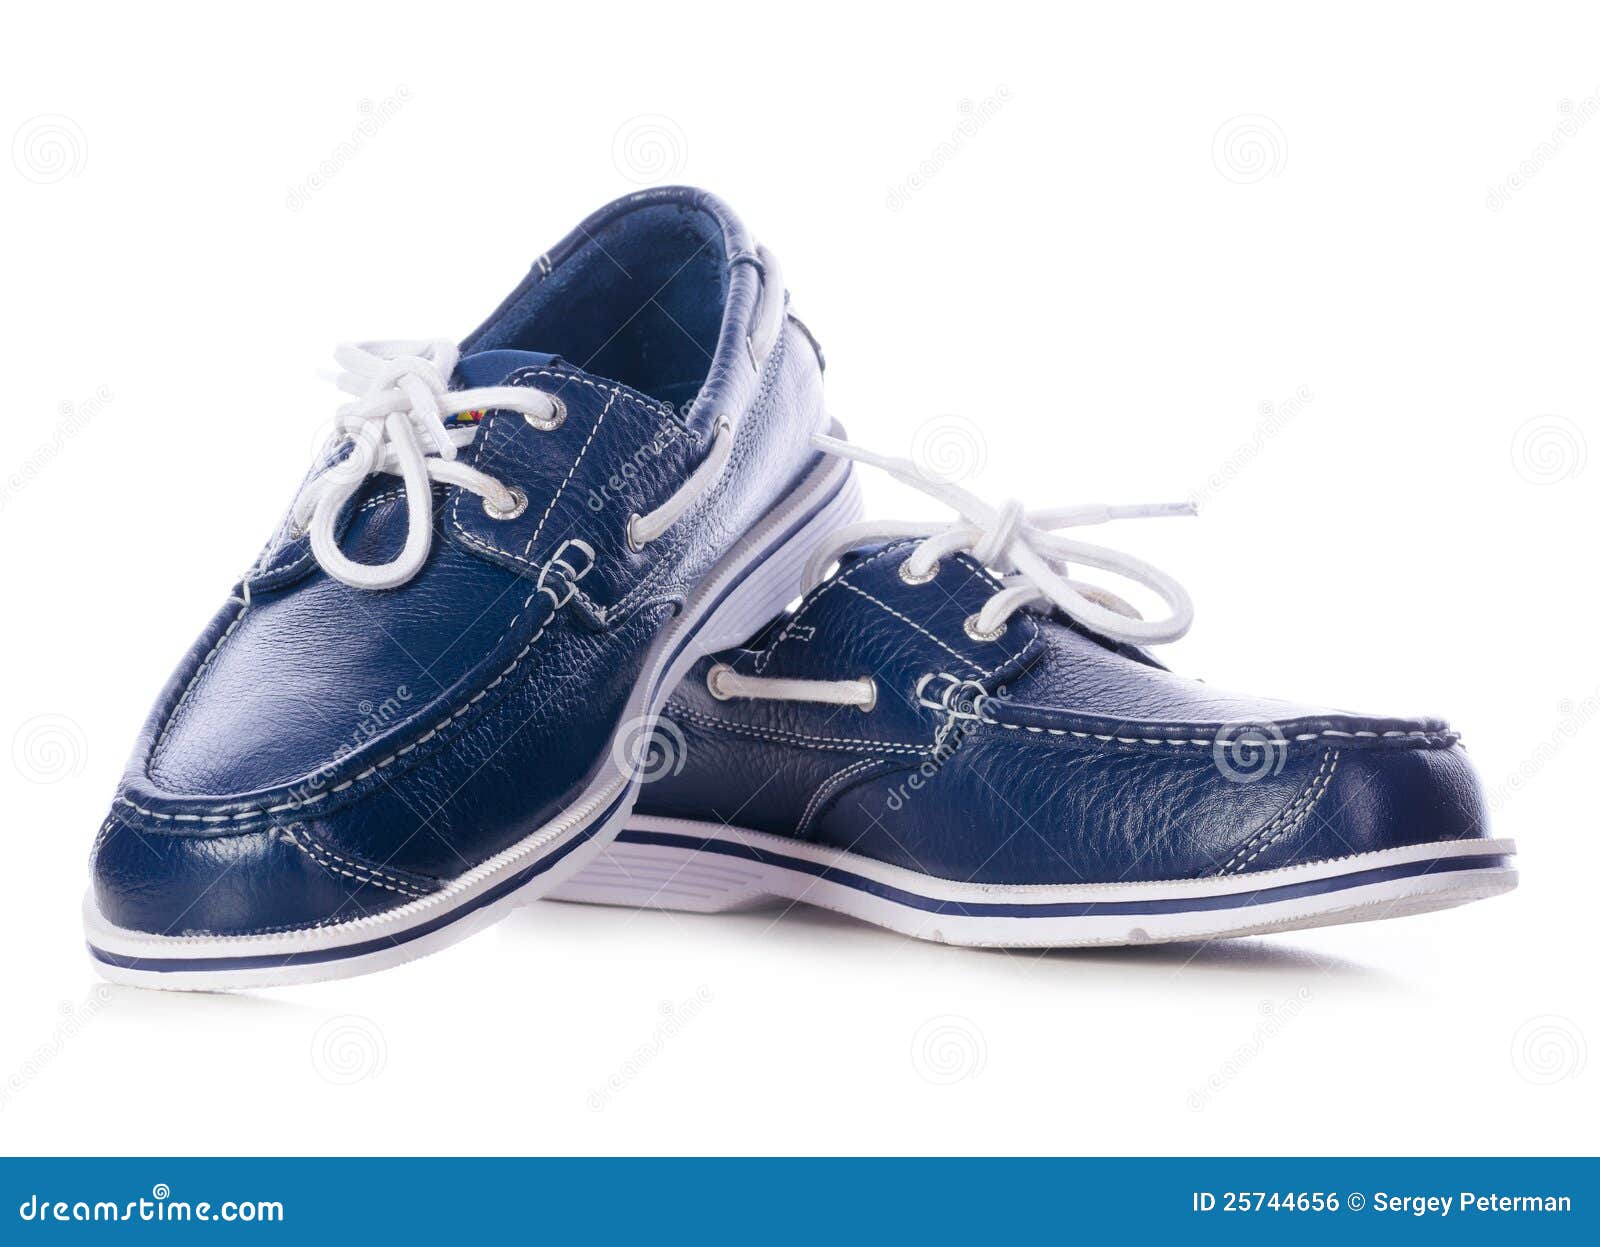 Blue leather deck shoes stock photo. Image of horizontal - 25744656